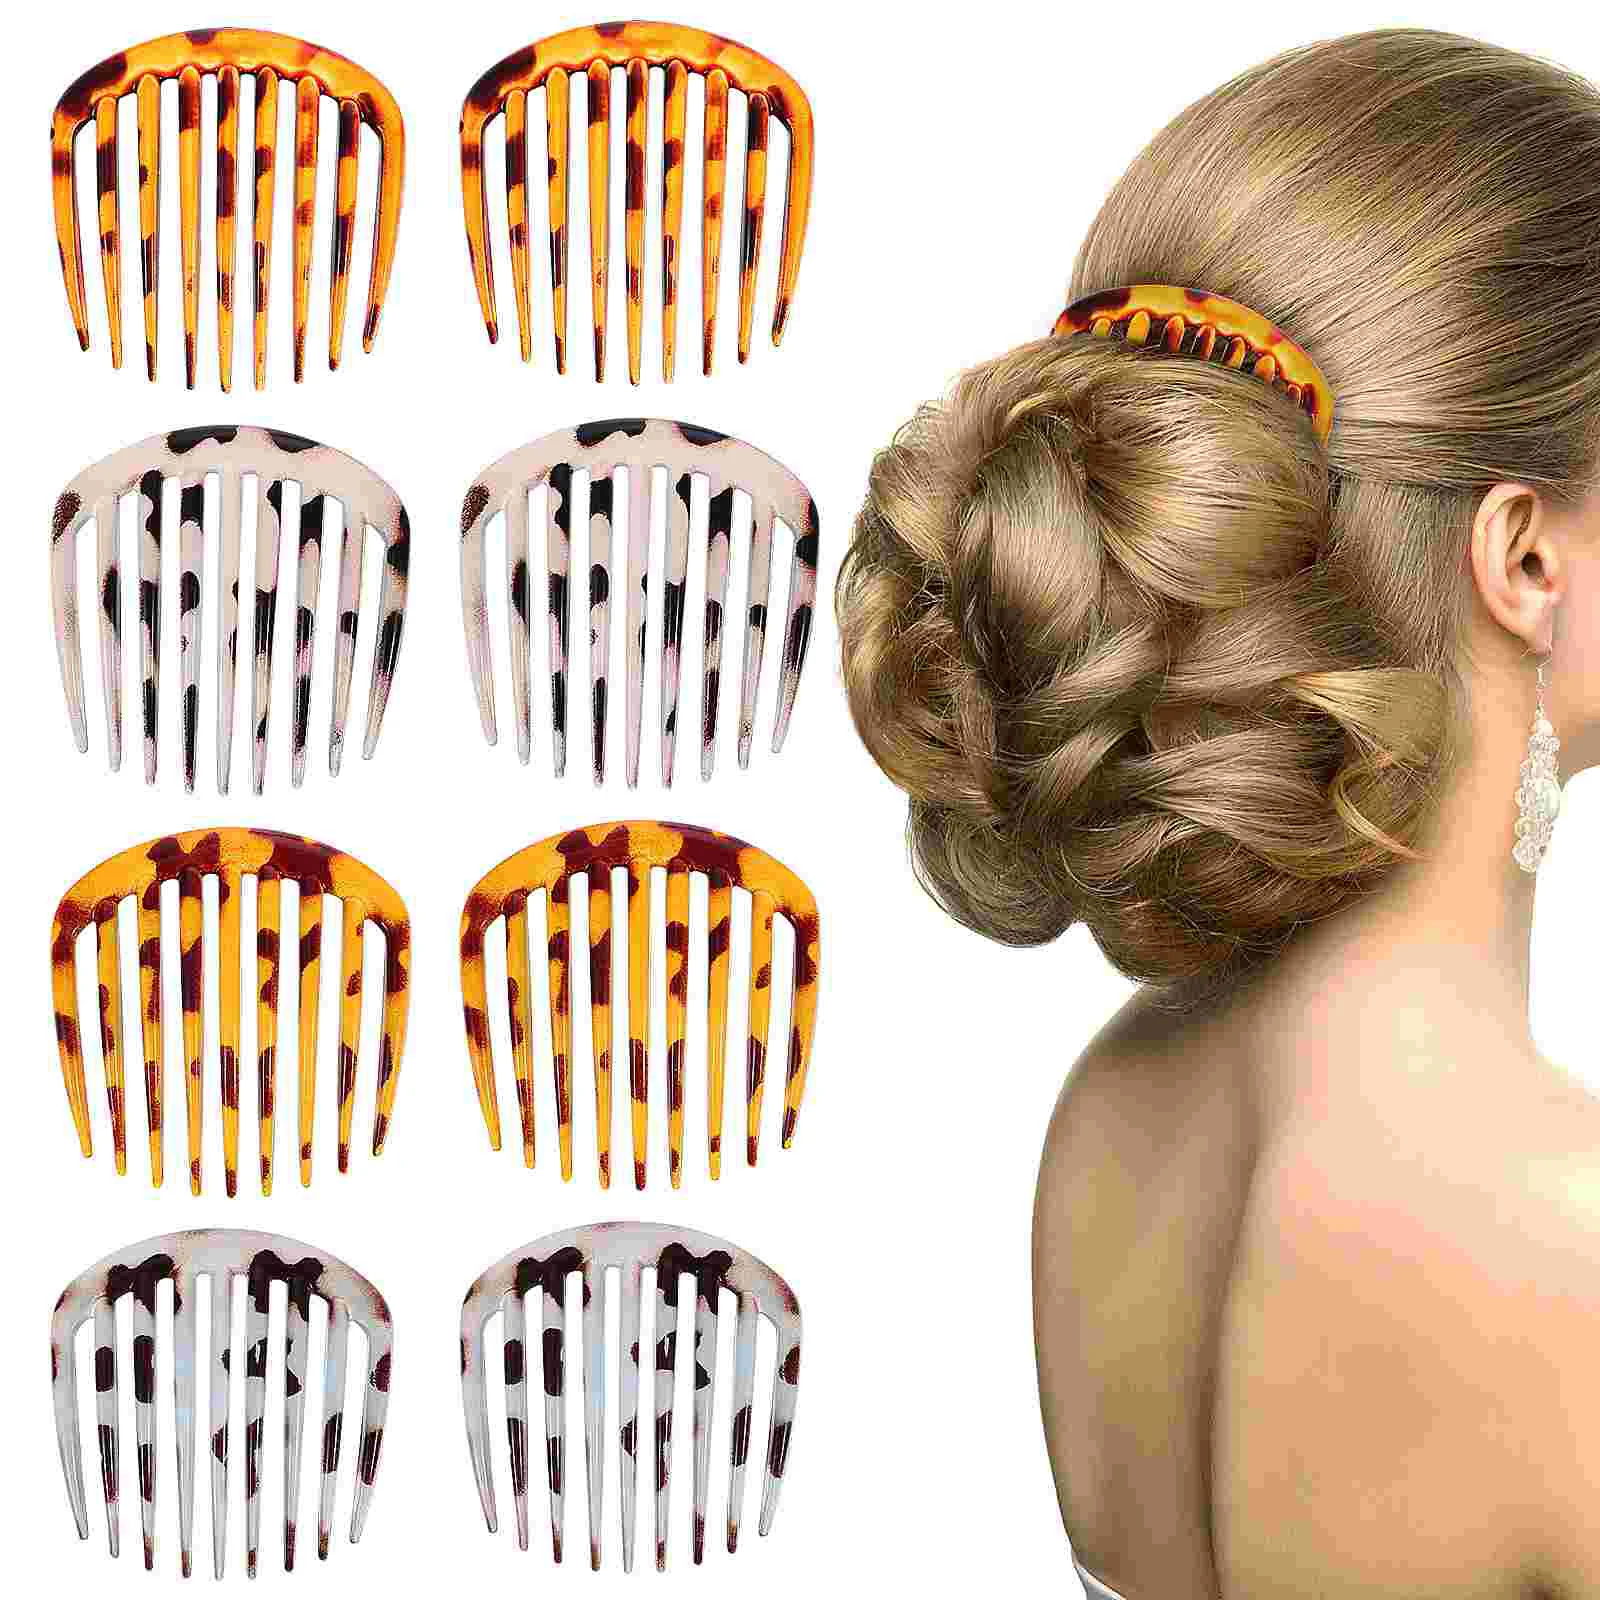 8 Pcs Retro Decor Hair Combs for Women Lacquer Side Clips Accessories Wedding Hair Accessories Women's